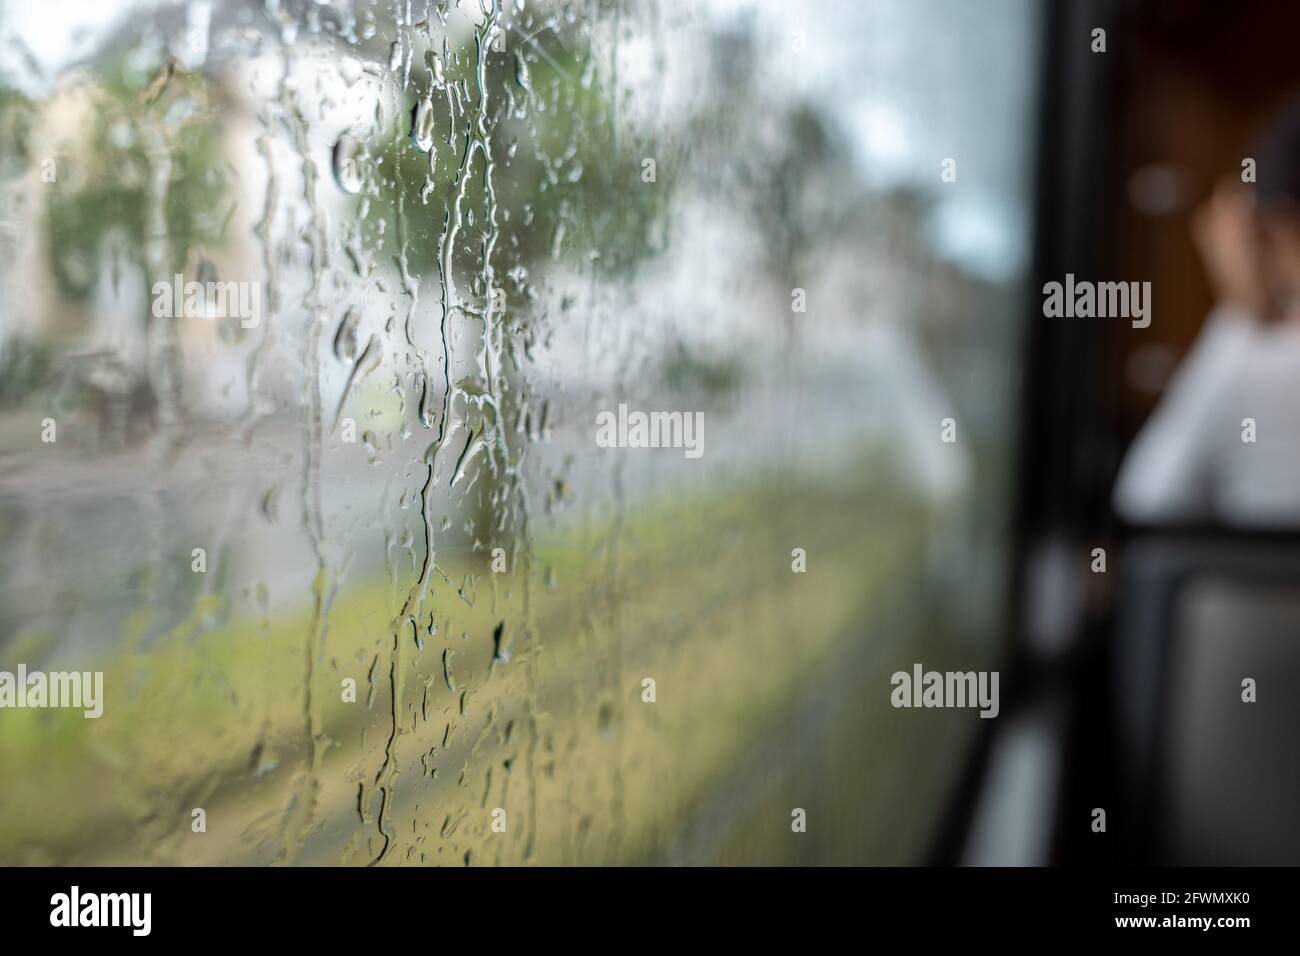 Close-up and macro view of raining water drop on outside windows of the tram or train and defocused background of indoor passenger train. Stock Photo